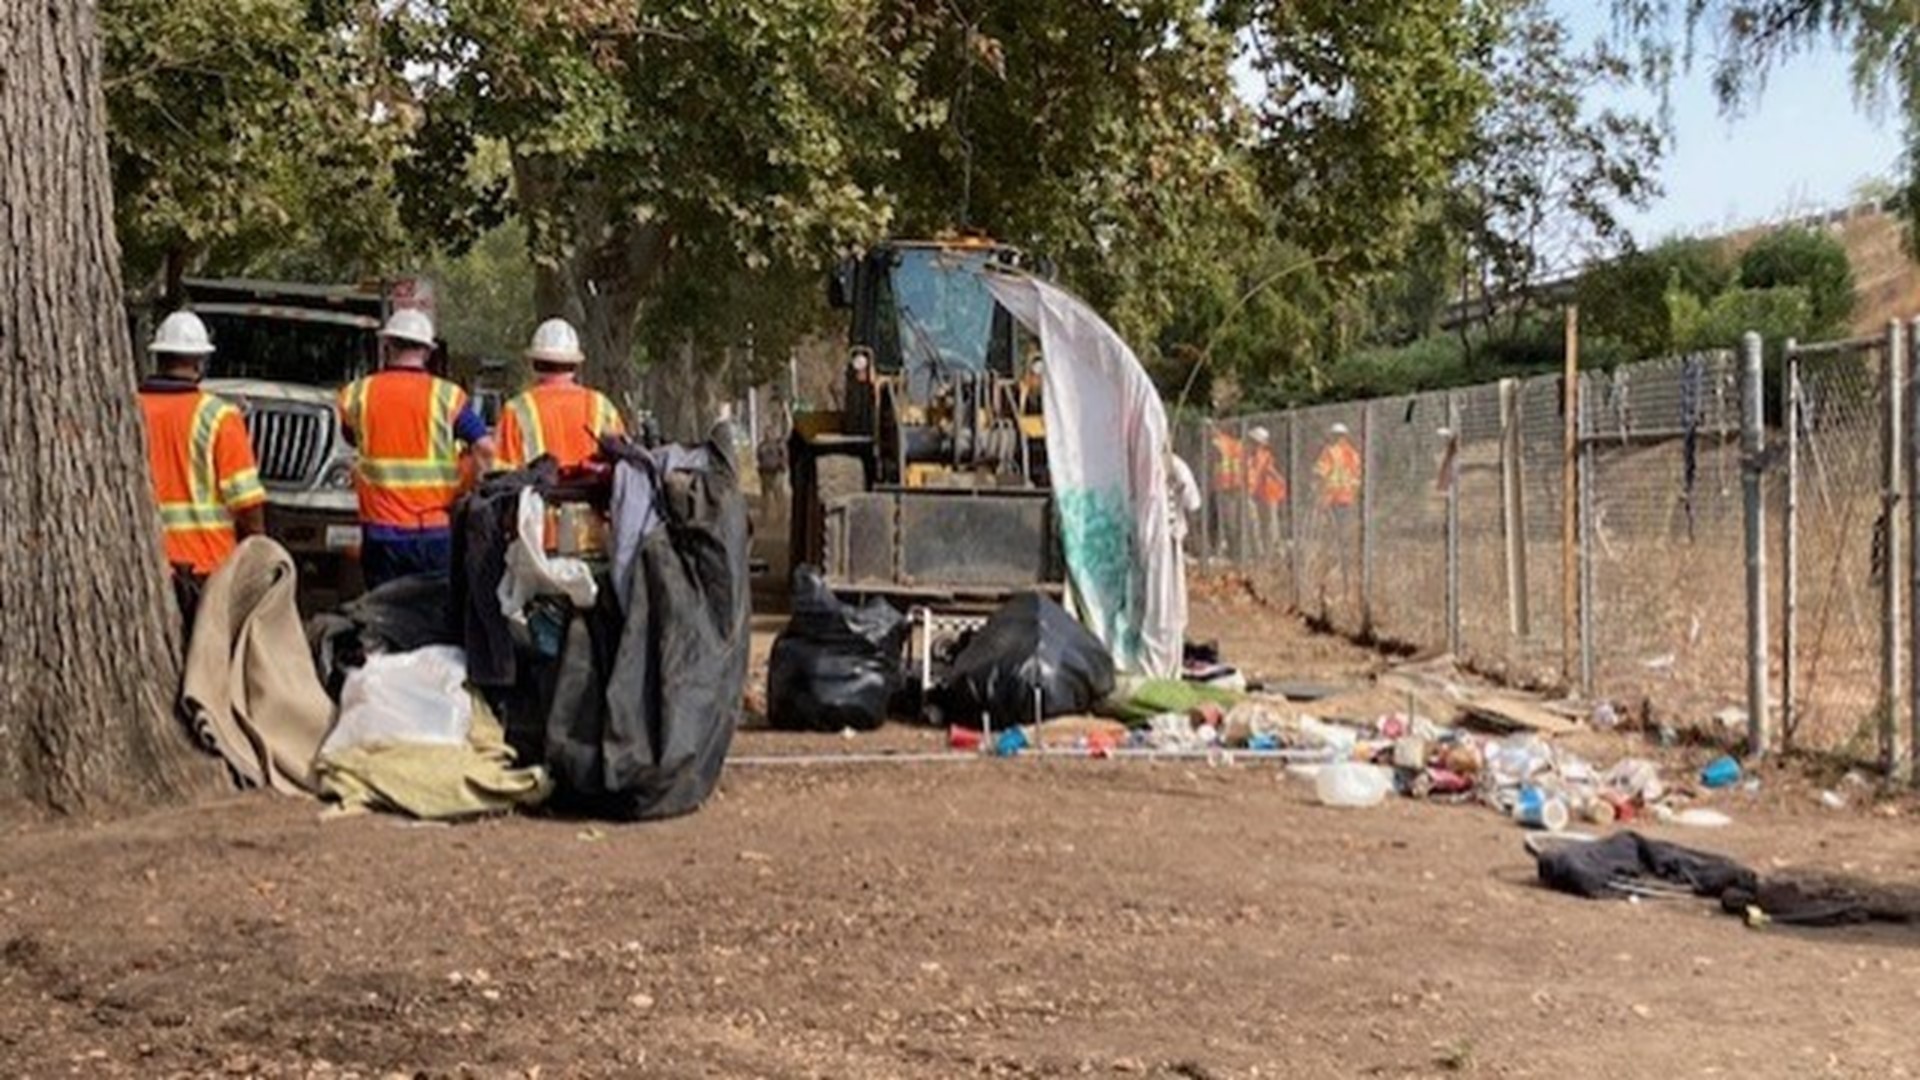 Cleanups are different based on which agency conducts them